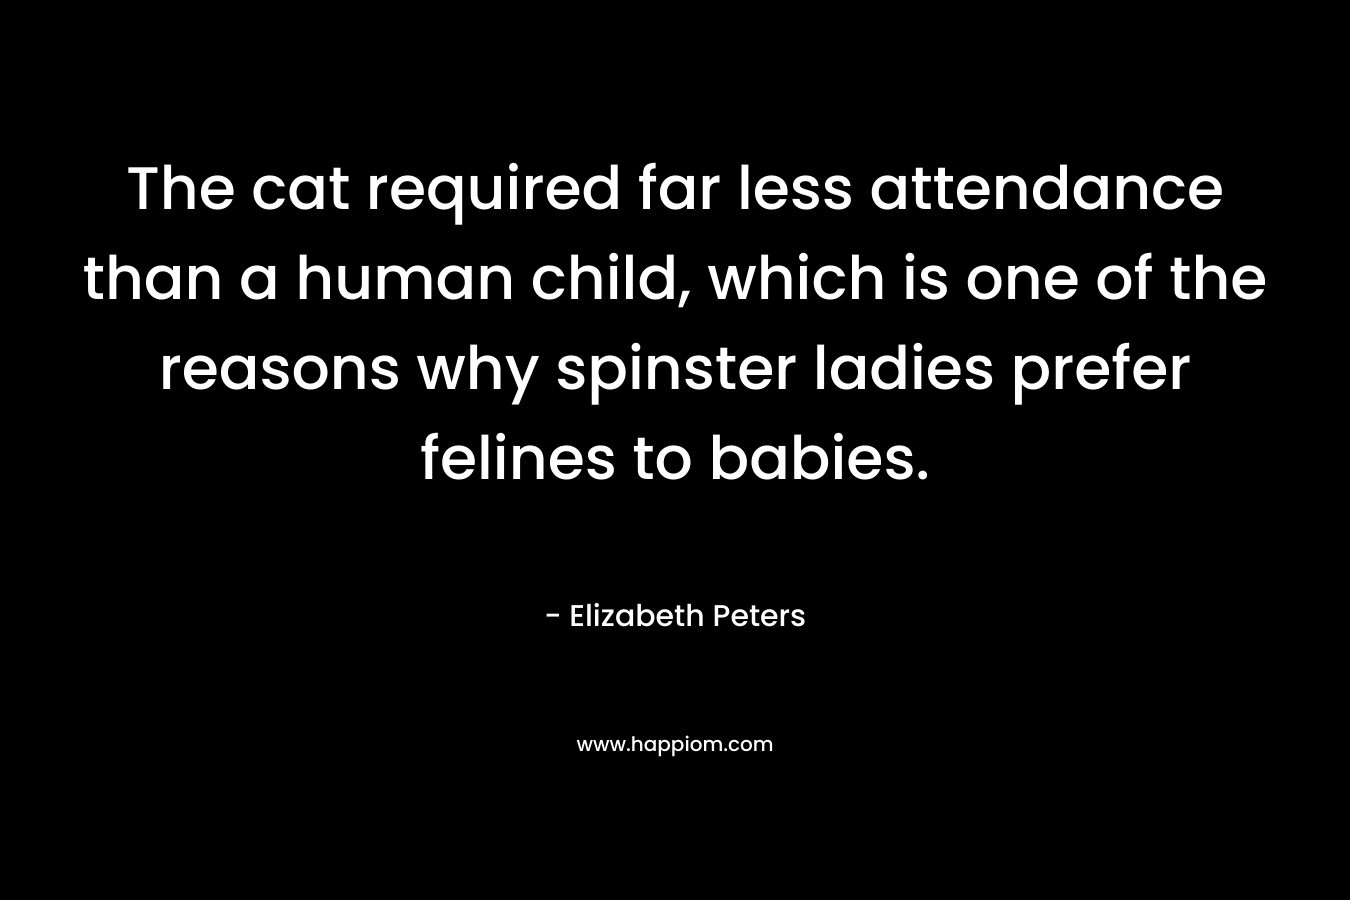 The cat required far less attendance than a human child, which is one of the reasons why spinster ladies prefer felines to babies. – Elizabeth Peters